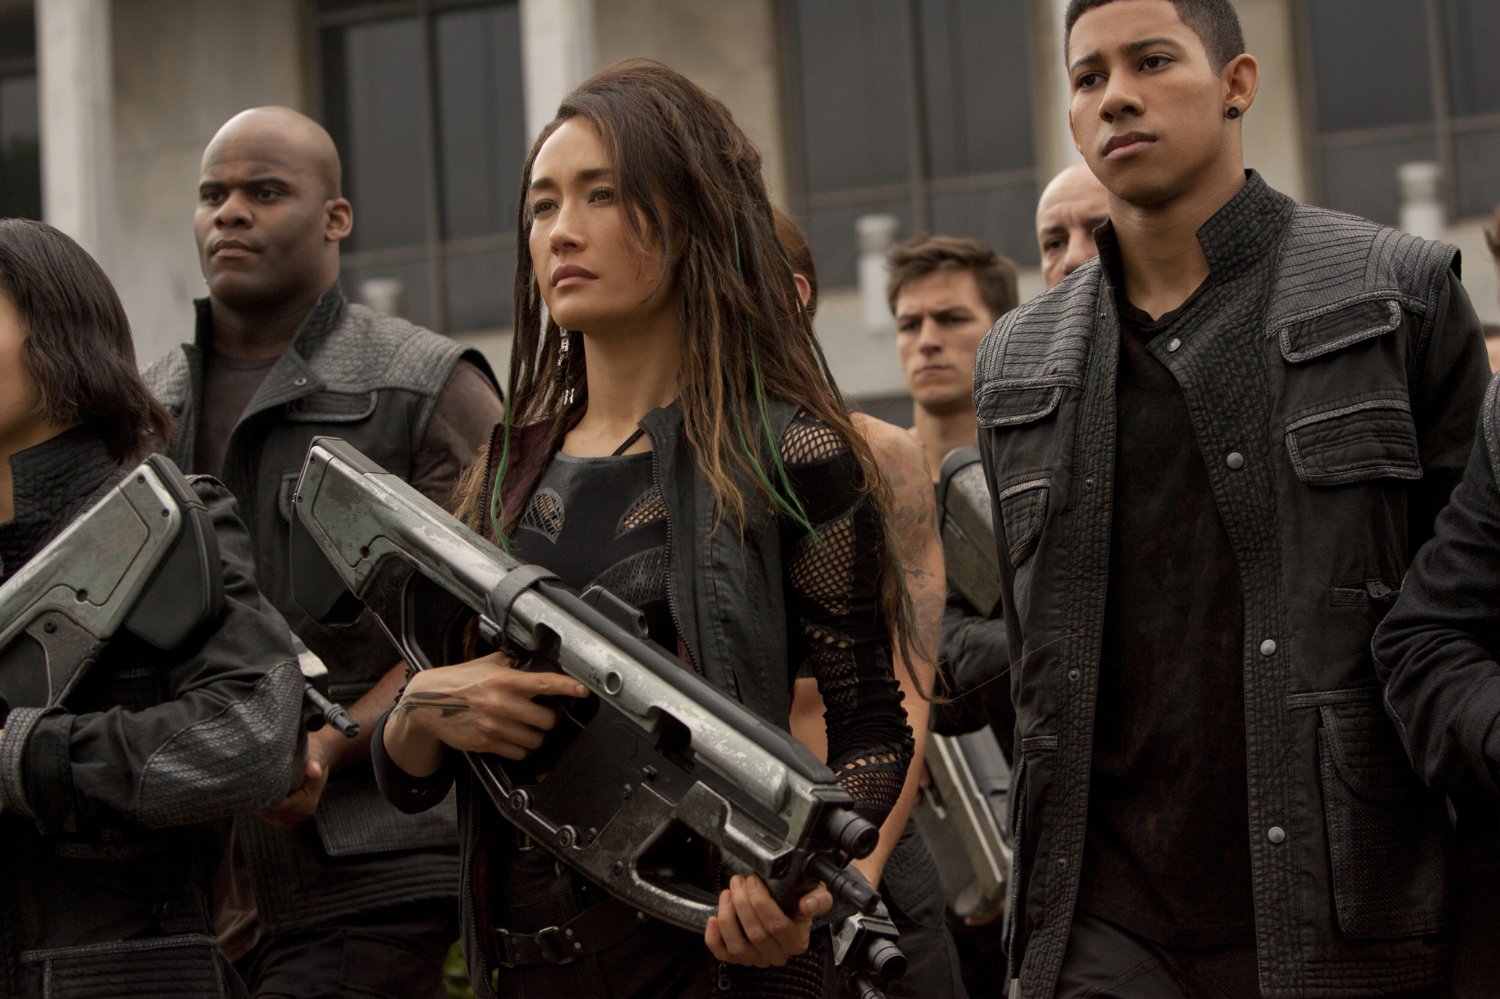 Insurgent 2015 Full Movie Watch in HD Online for Free - #1 Movies Website